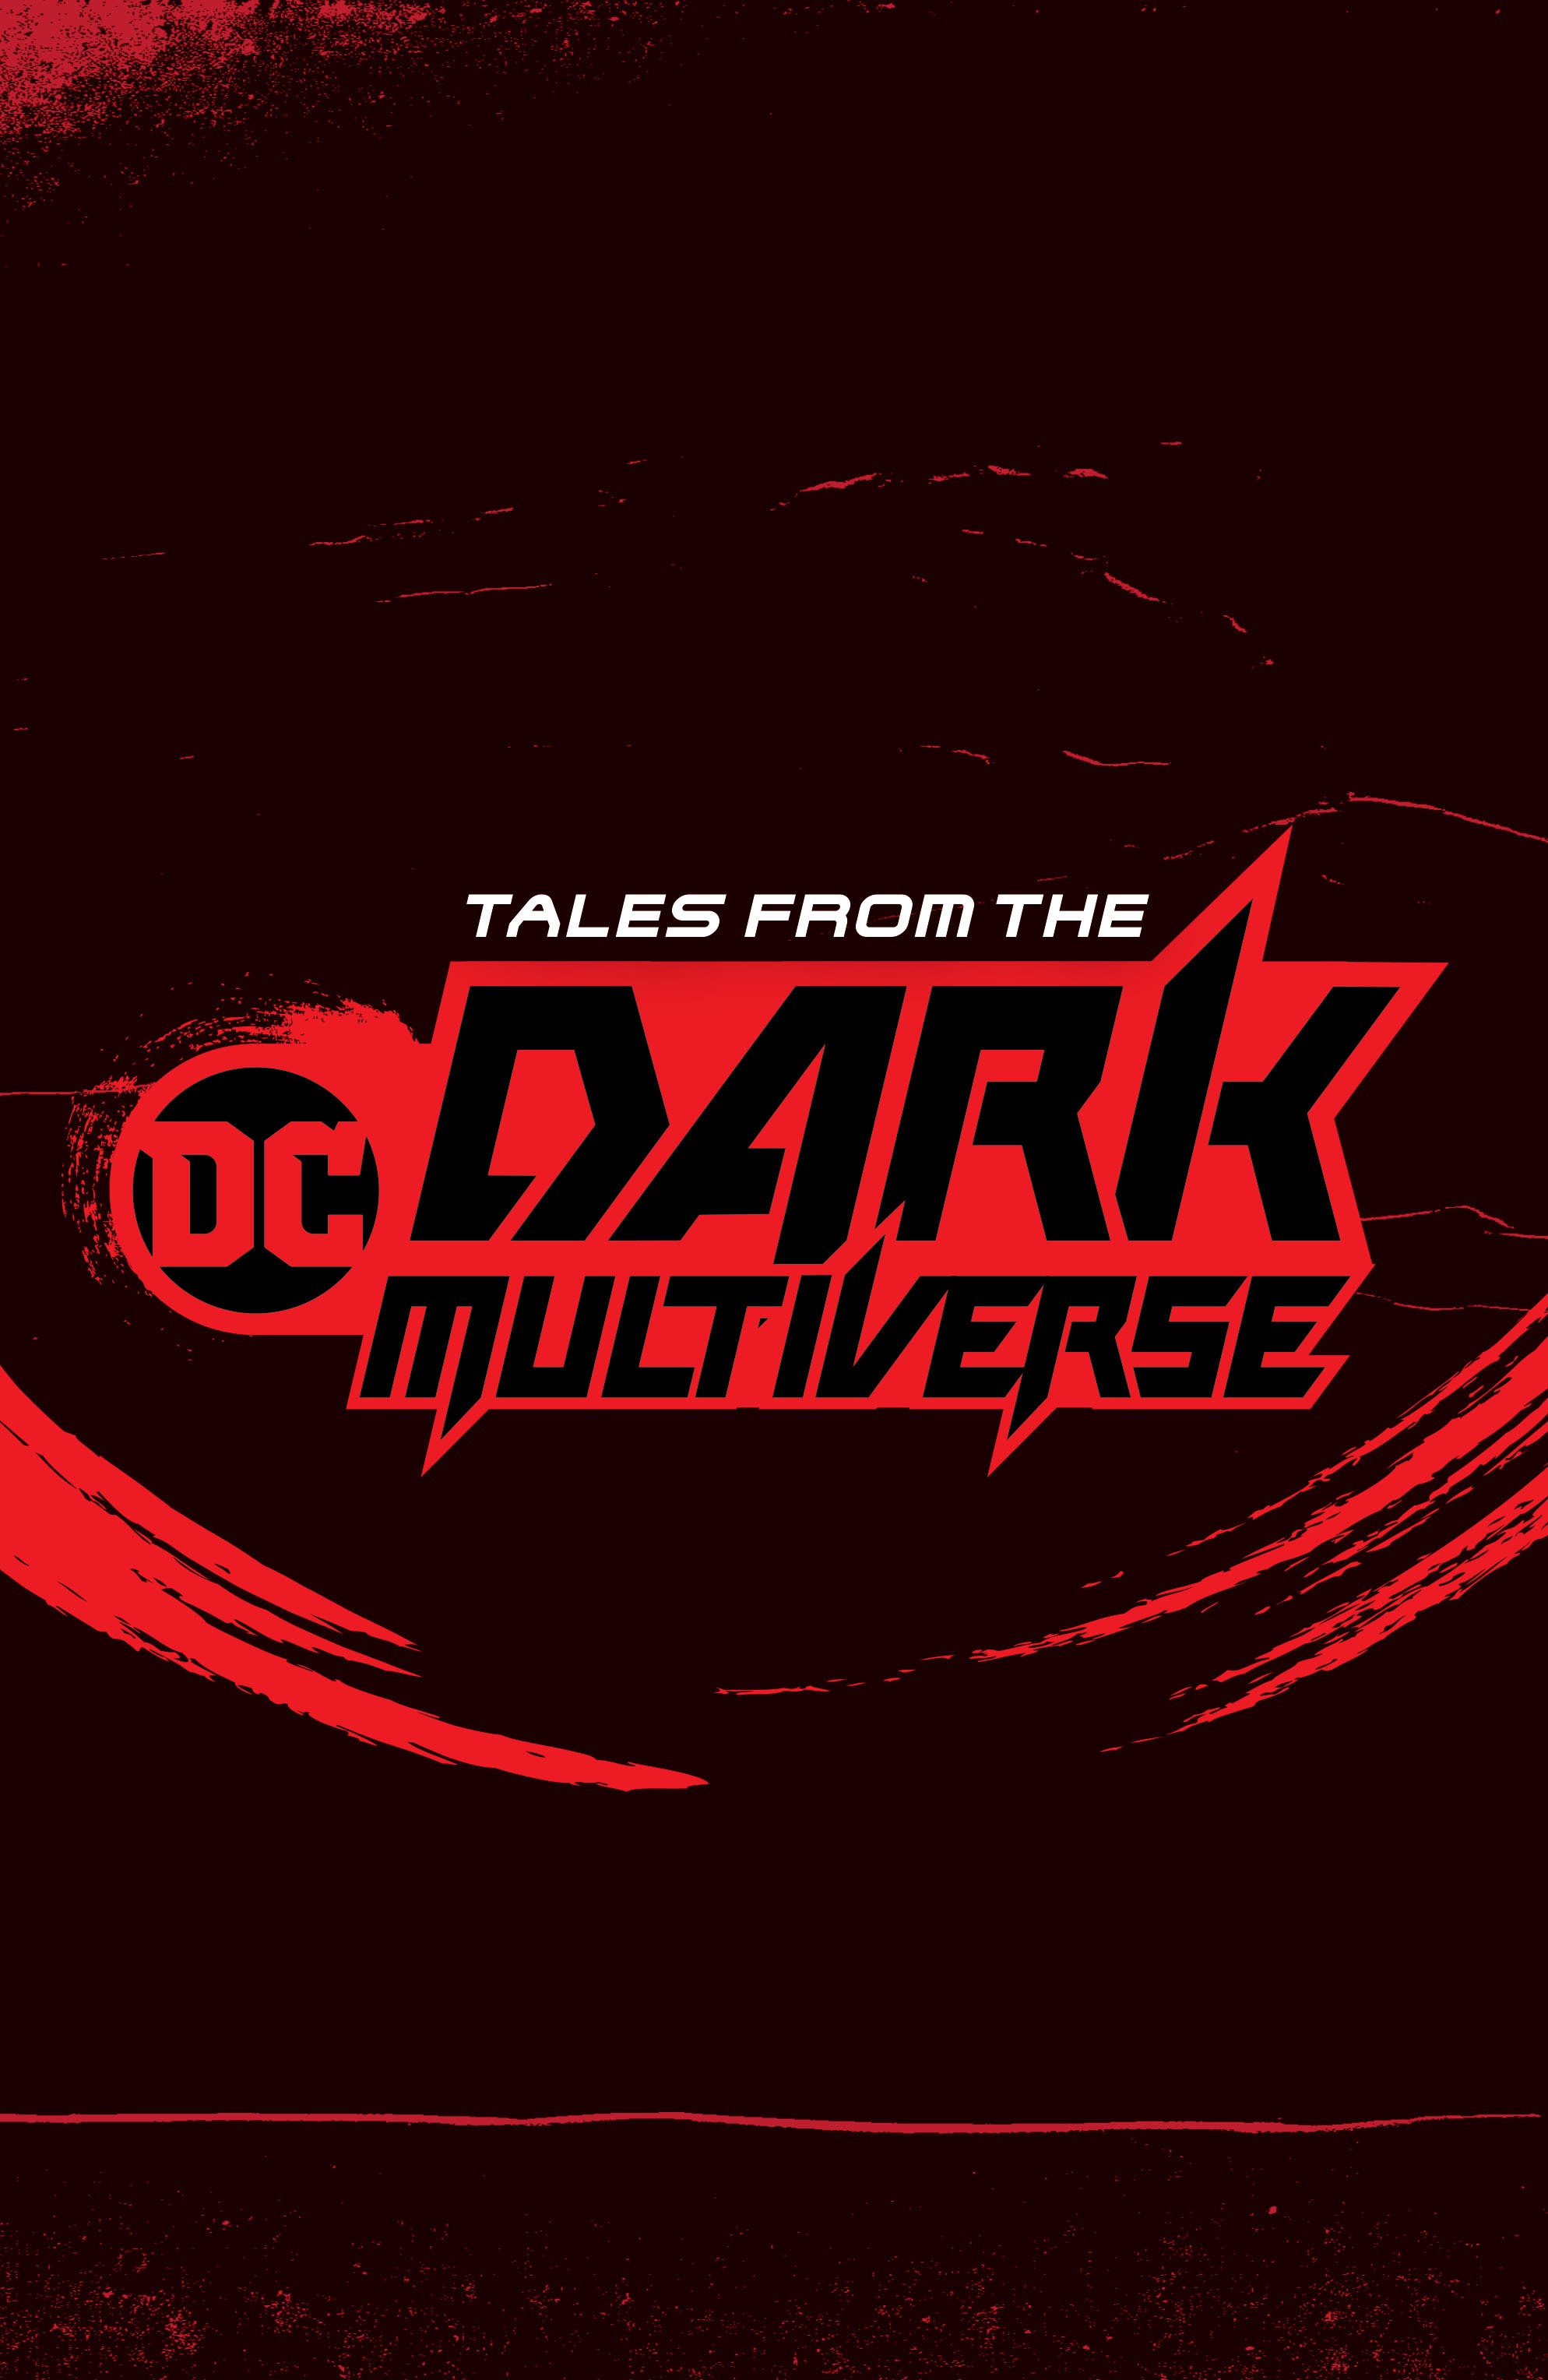 Read online Tales From the DC Dark Multiverse comic -  Issue # TPB (Part 1) - 2